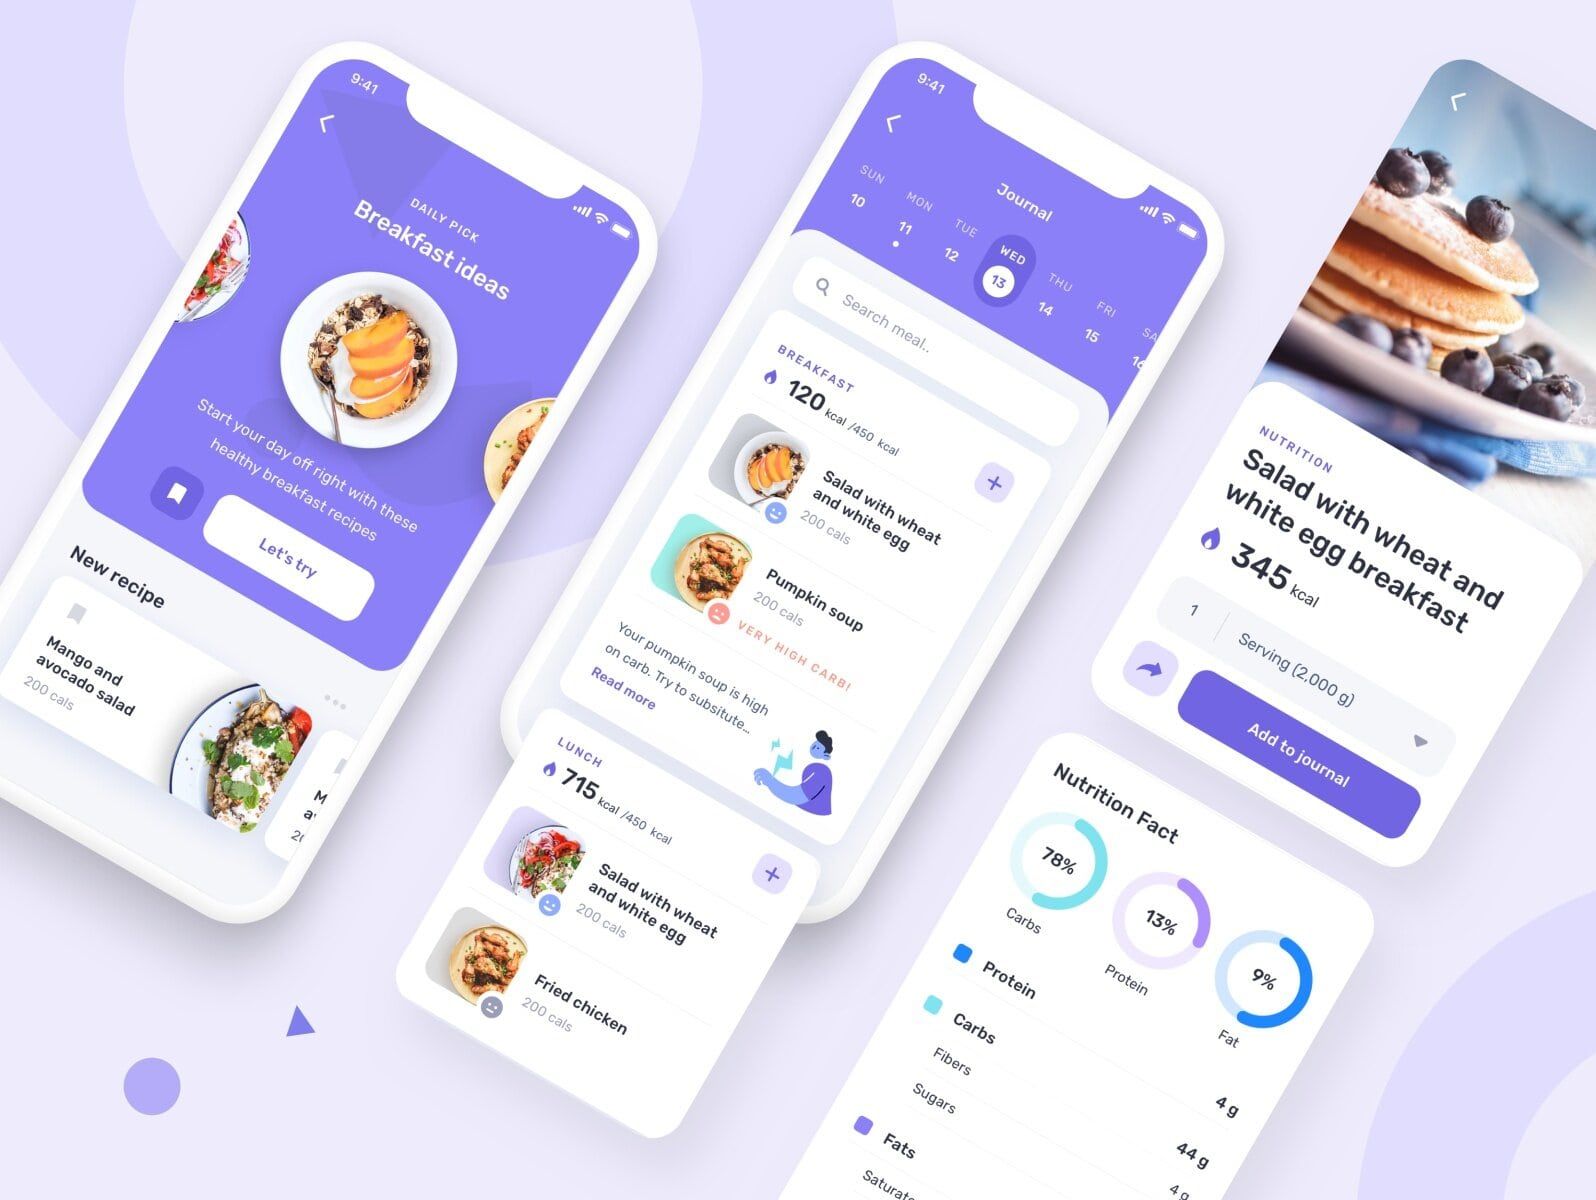 You can make a standalone nutrition app or add such features to your fitness application (*image by [Grace Saraswati](https://dribbble.com/gracesaraswati){ rel="nofollow" target="_blank" .default-md}*)